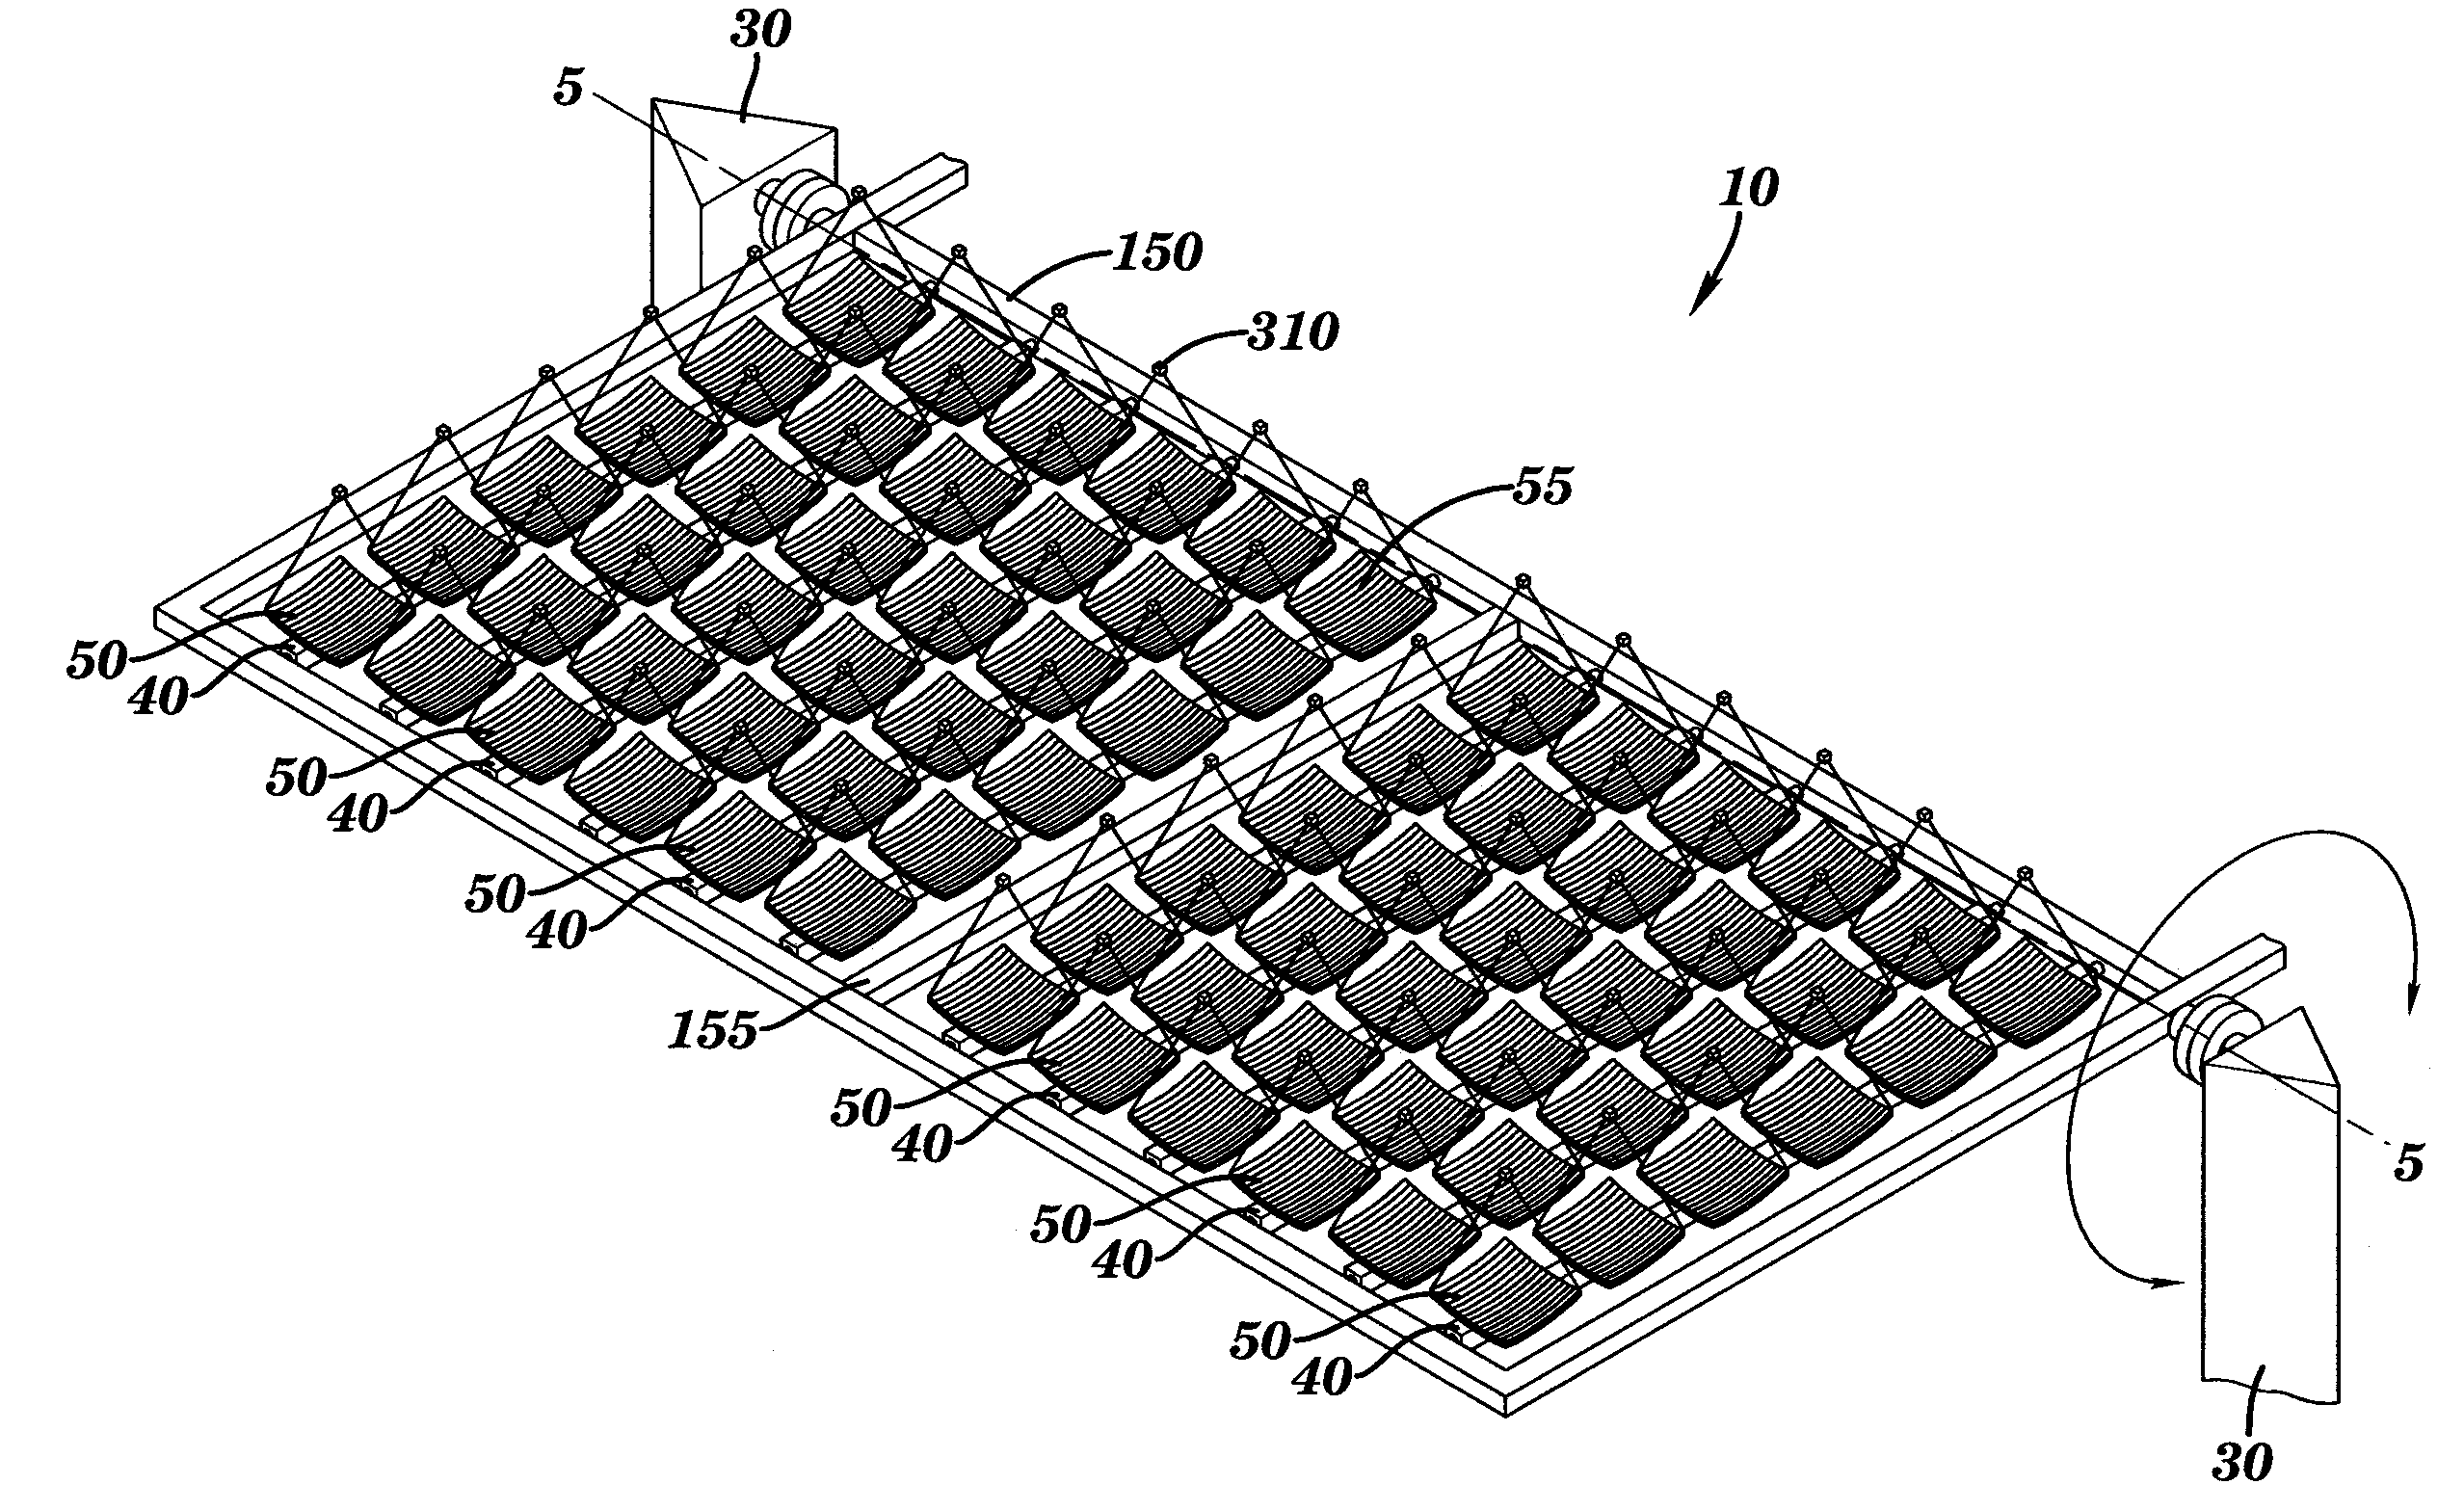 Solar concentrator system